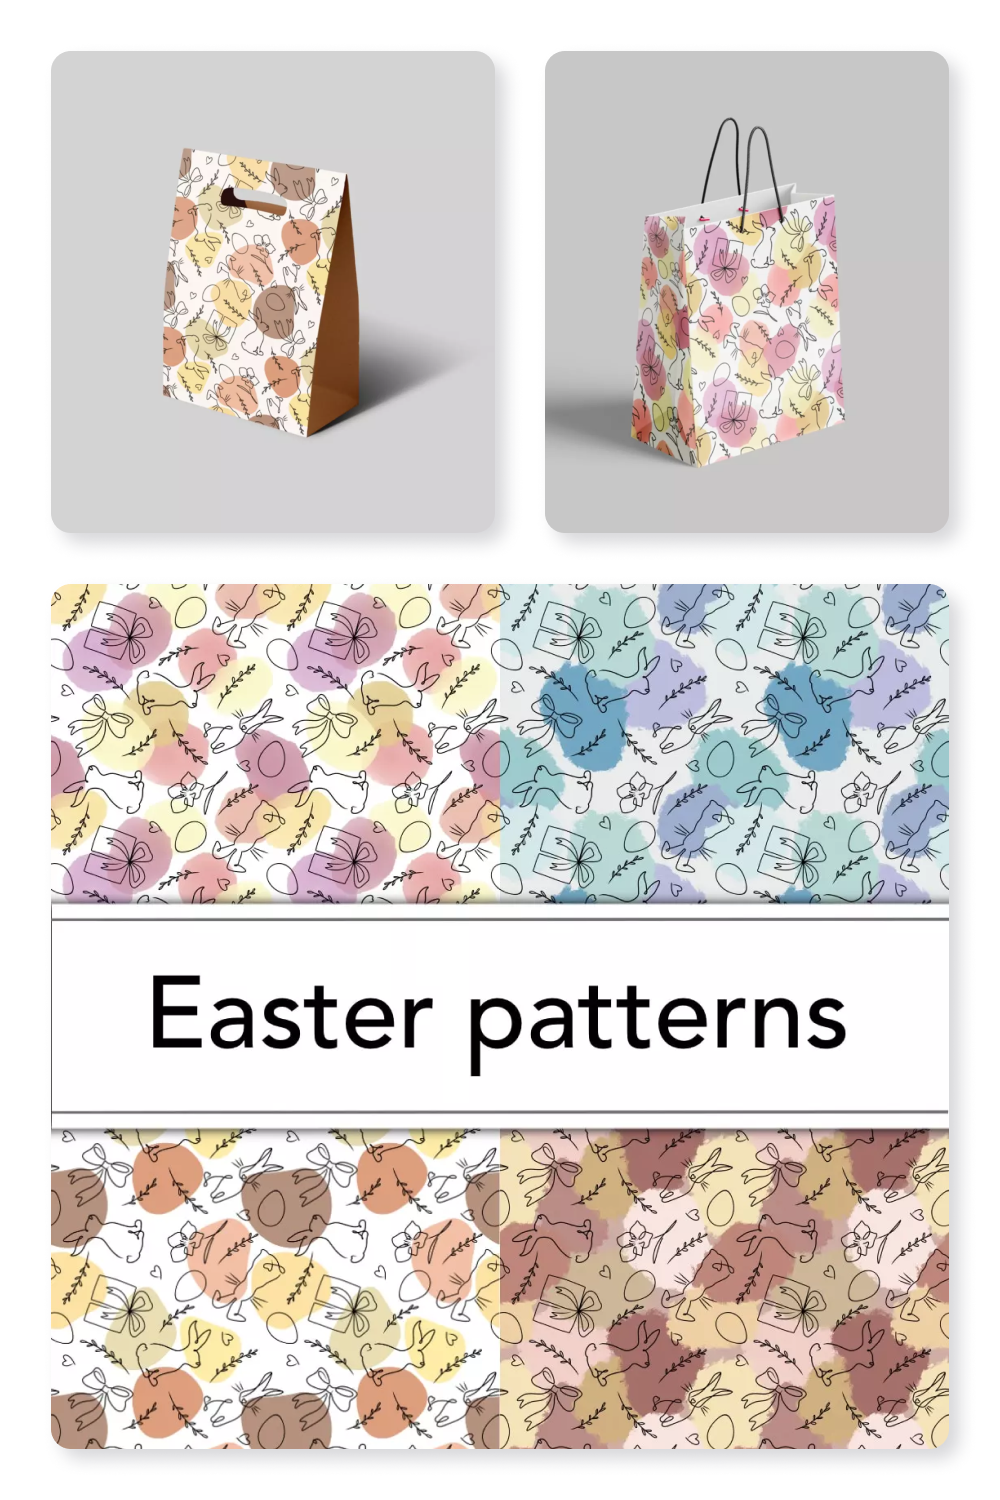 Sillhouettes of the rabbits, gifts, eggs, flowers on a colorful backgrounds.